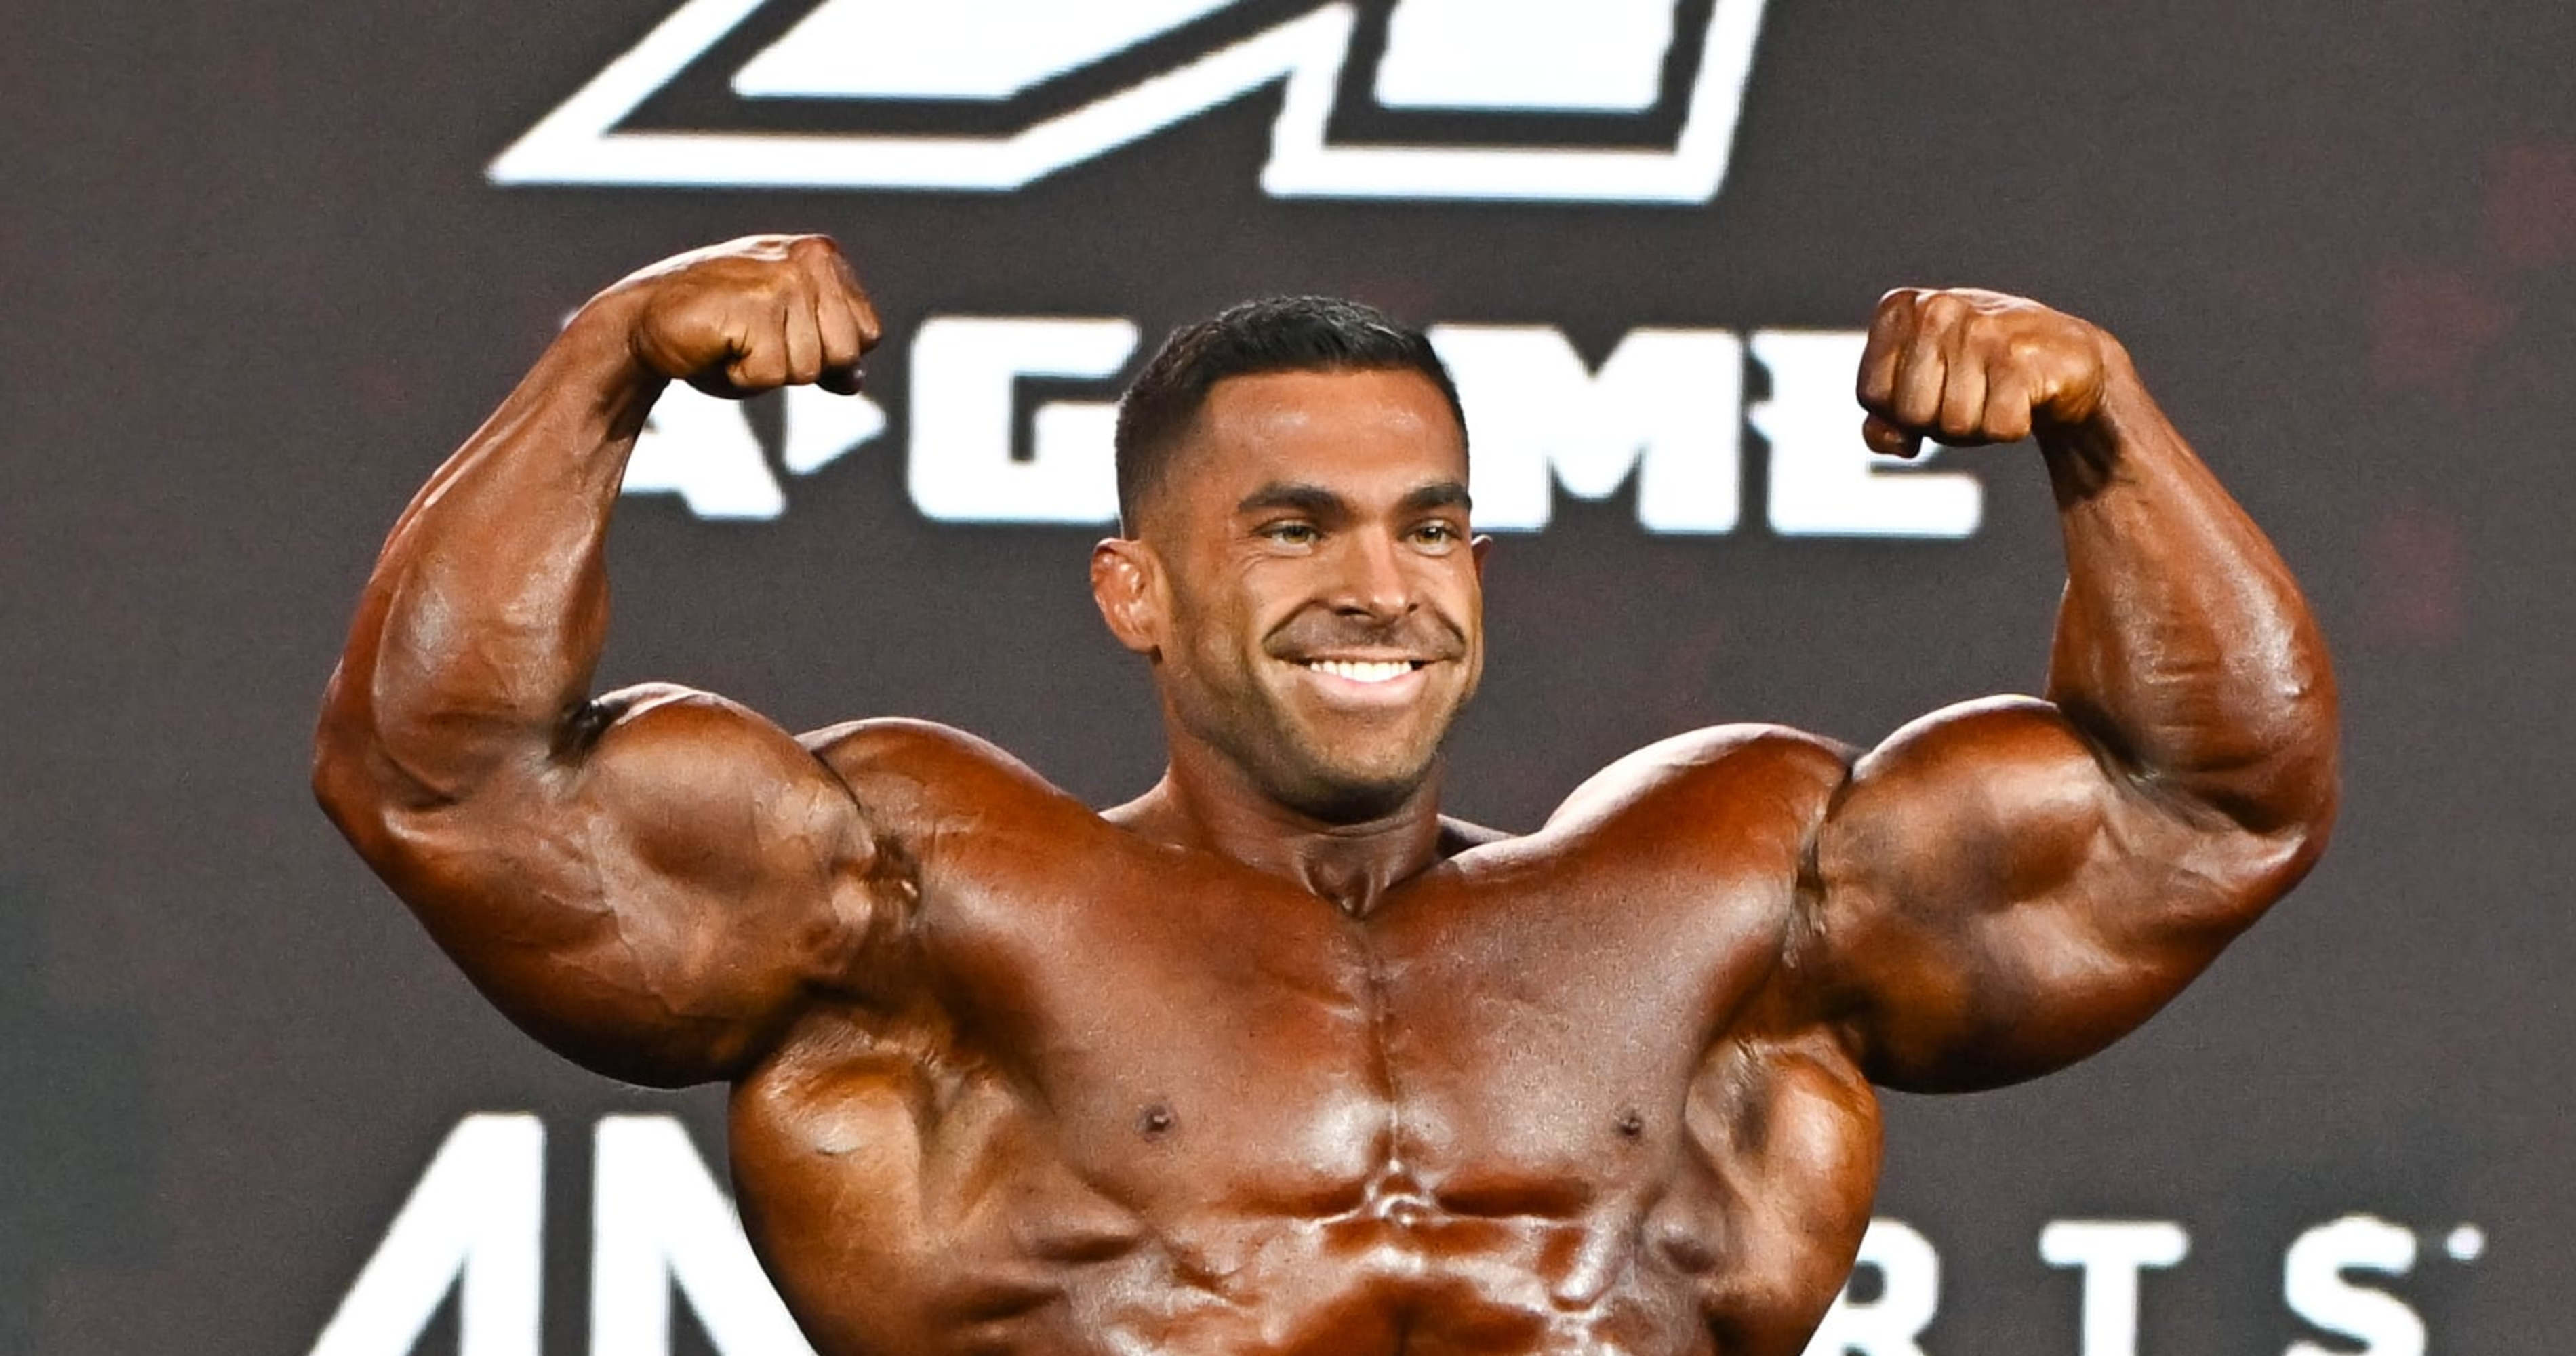 Mr. Olympia 2023: Final Results, Top Videos and Predictions for